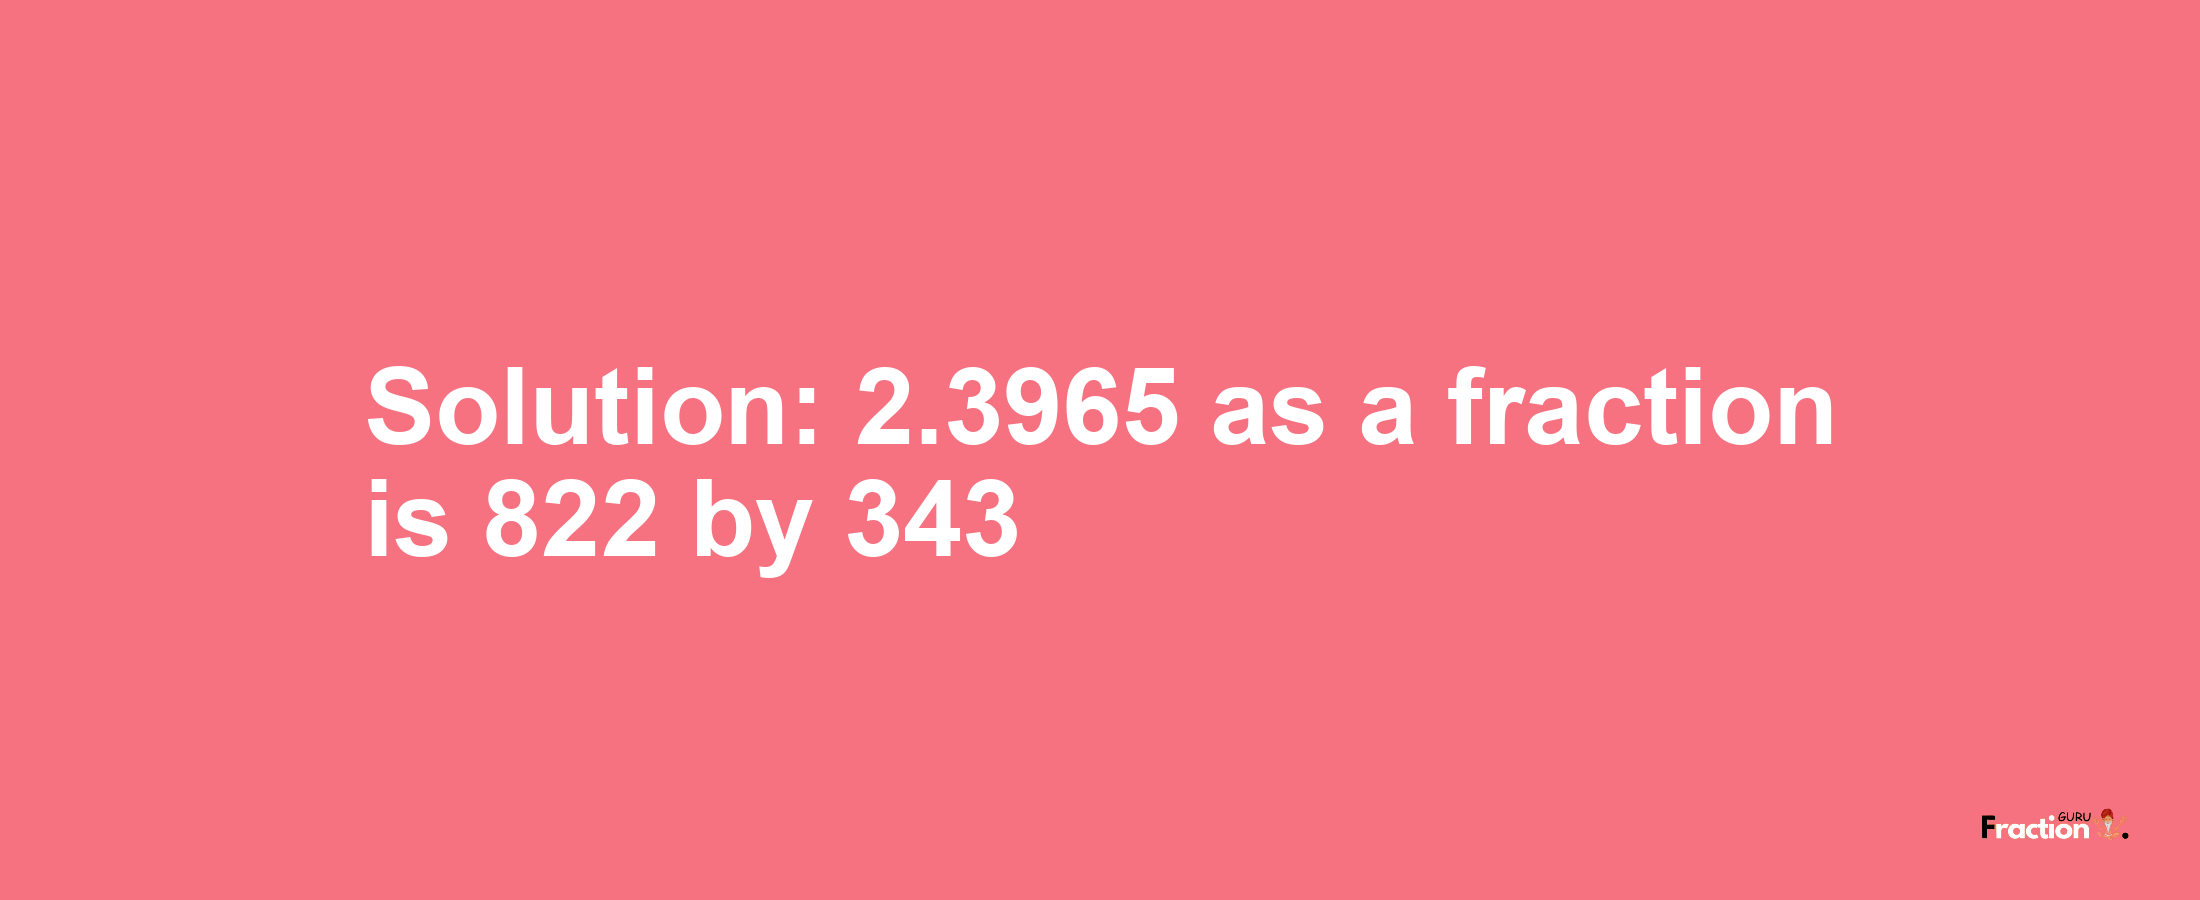 Solution:2.3965 as a fraction is 822/343